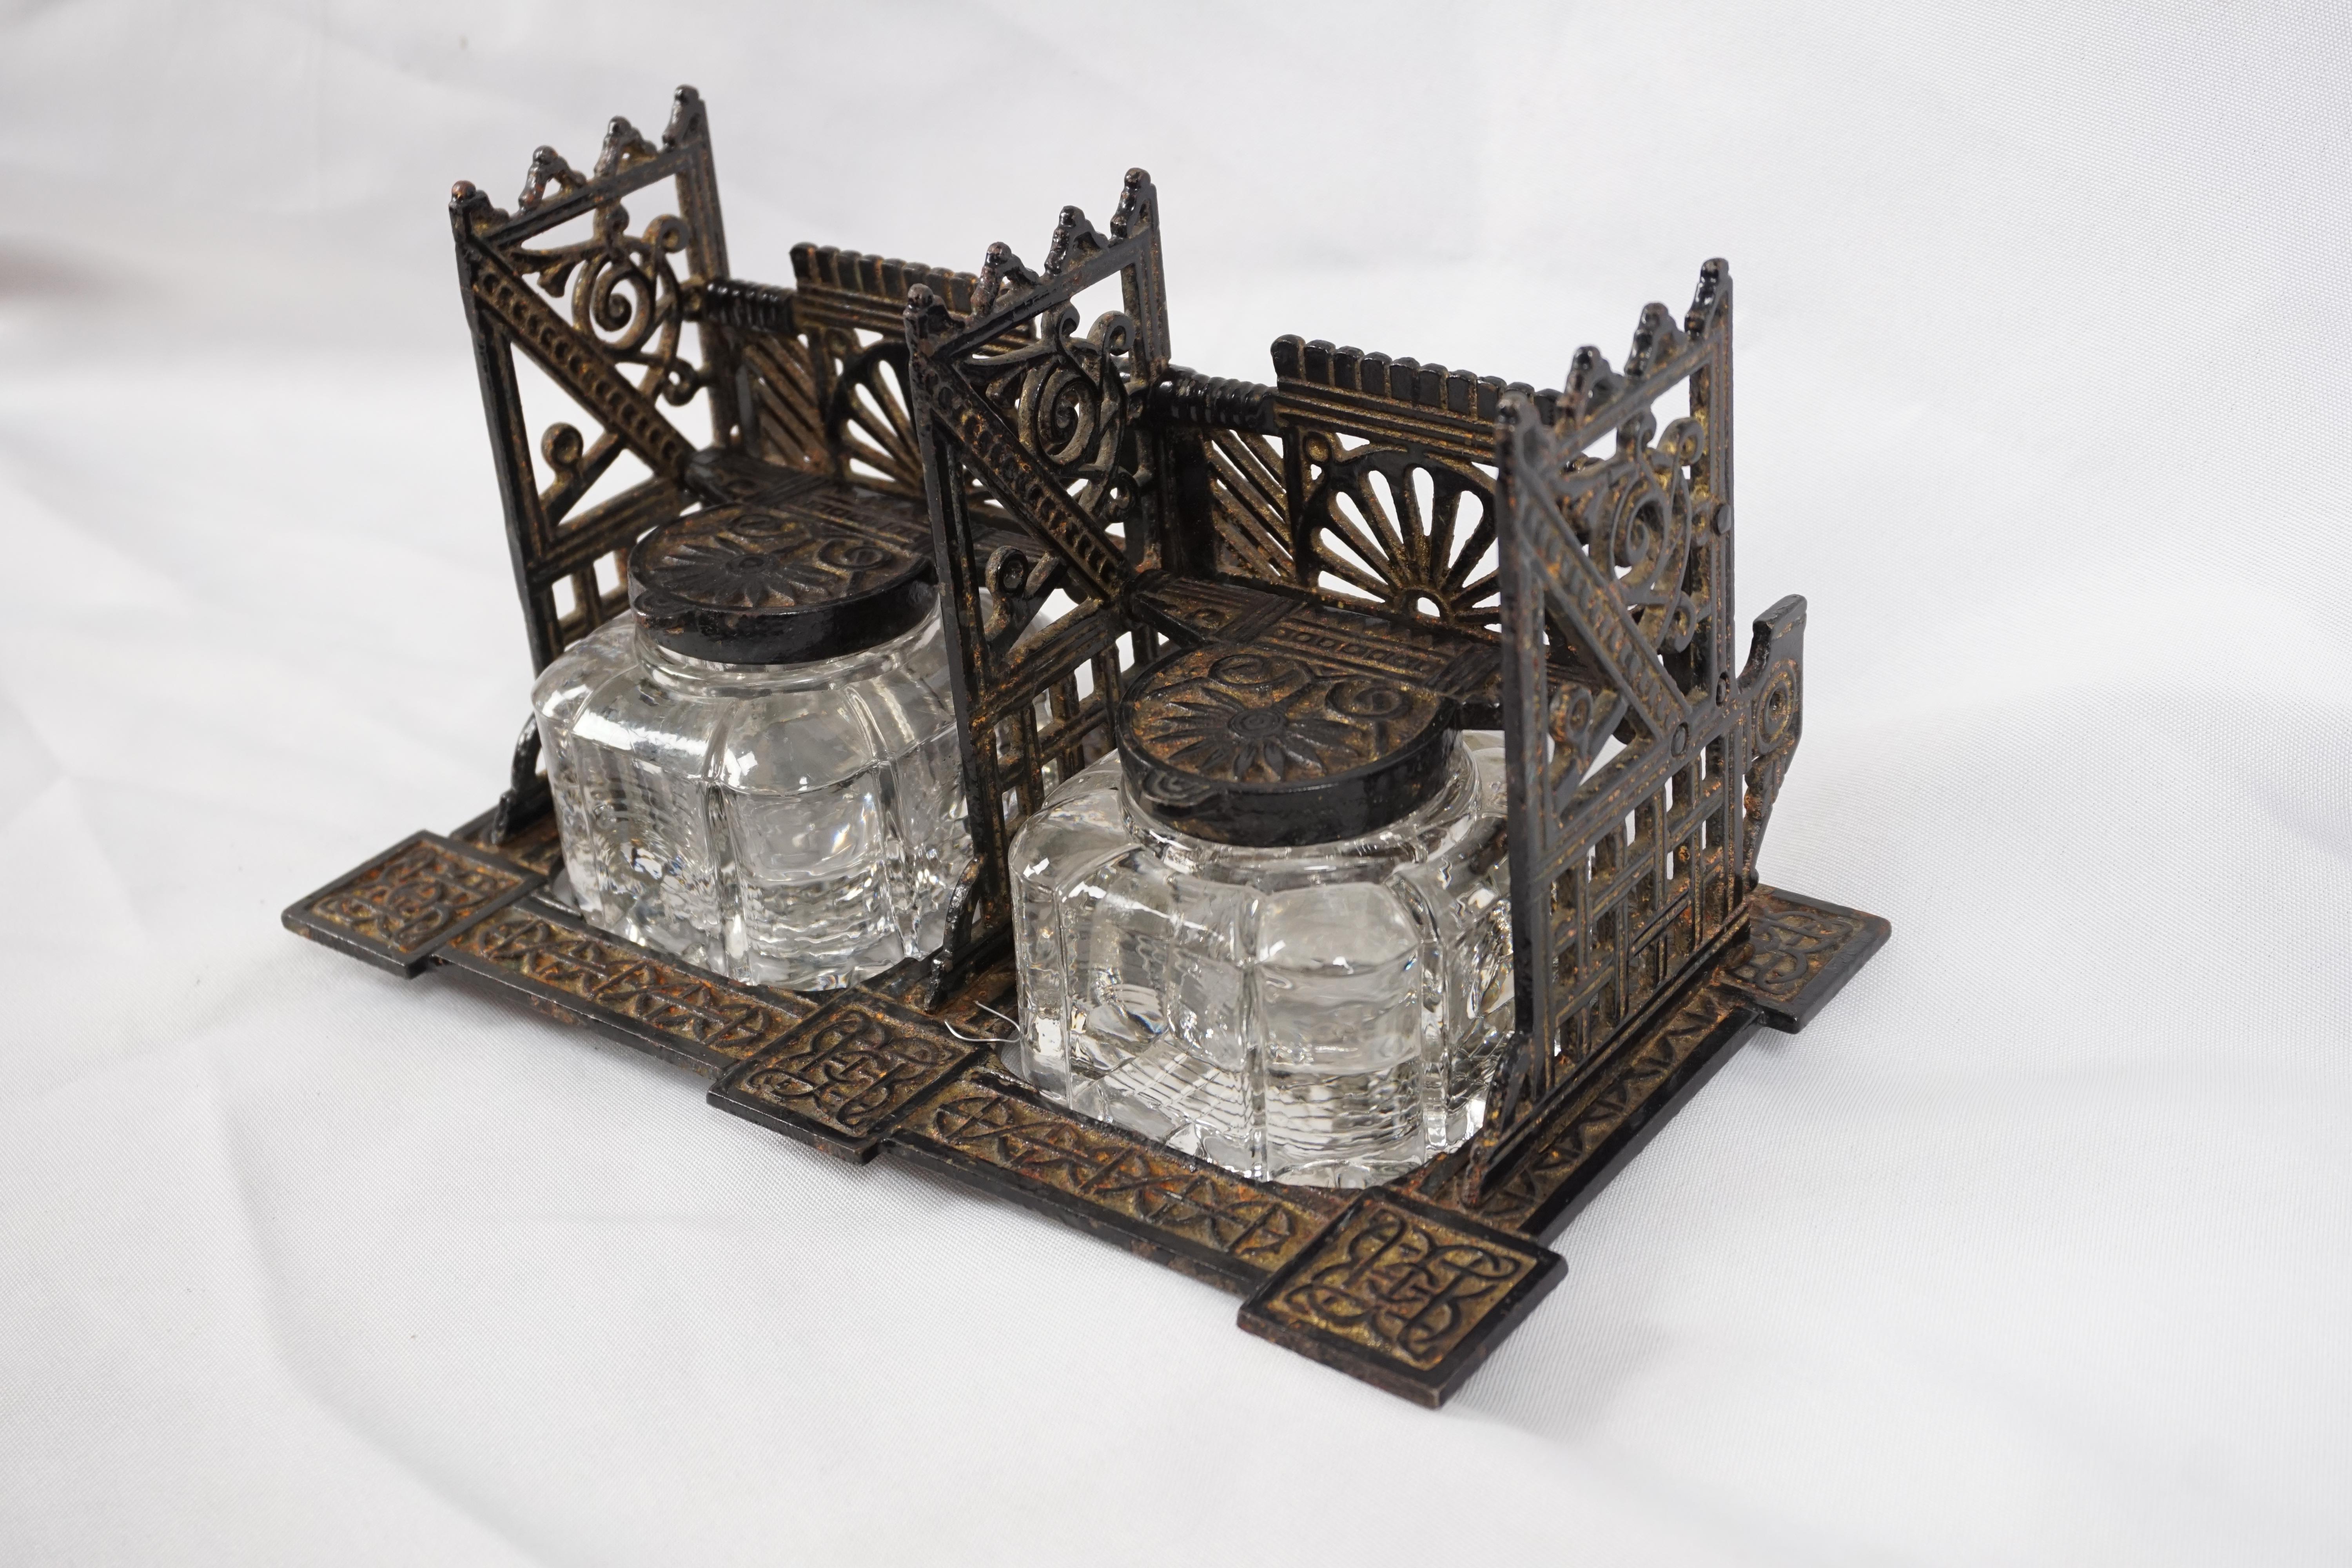 Antique Metal Inkwell, Victorian Double Inkstand, England 1890, H302

England 1890
Metal
Three Quarter Metal Gallery 
Pen Rest To The Back 
Pair Of Glass Inkwells With Tops 
All Sitting In A Carved Metal Base 
Very Solid 

H302

Measures: 8.5